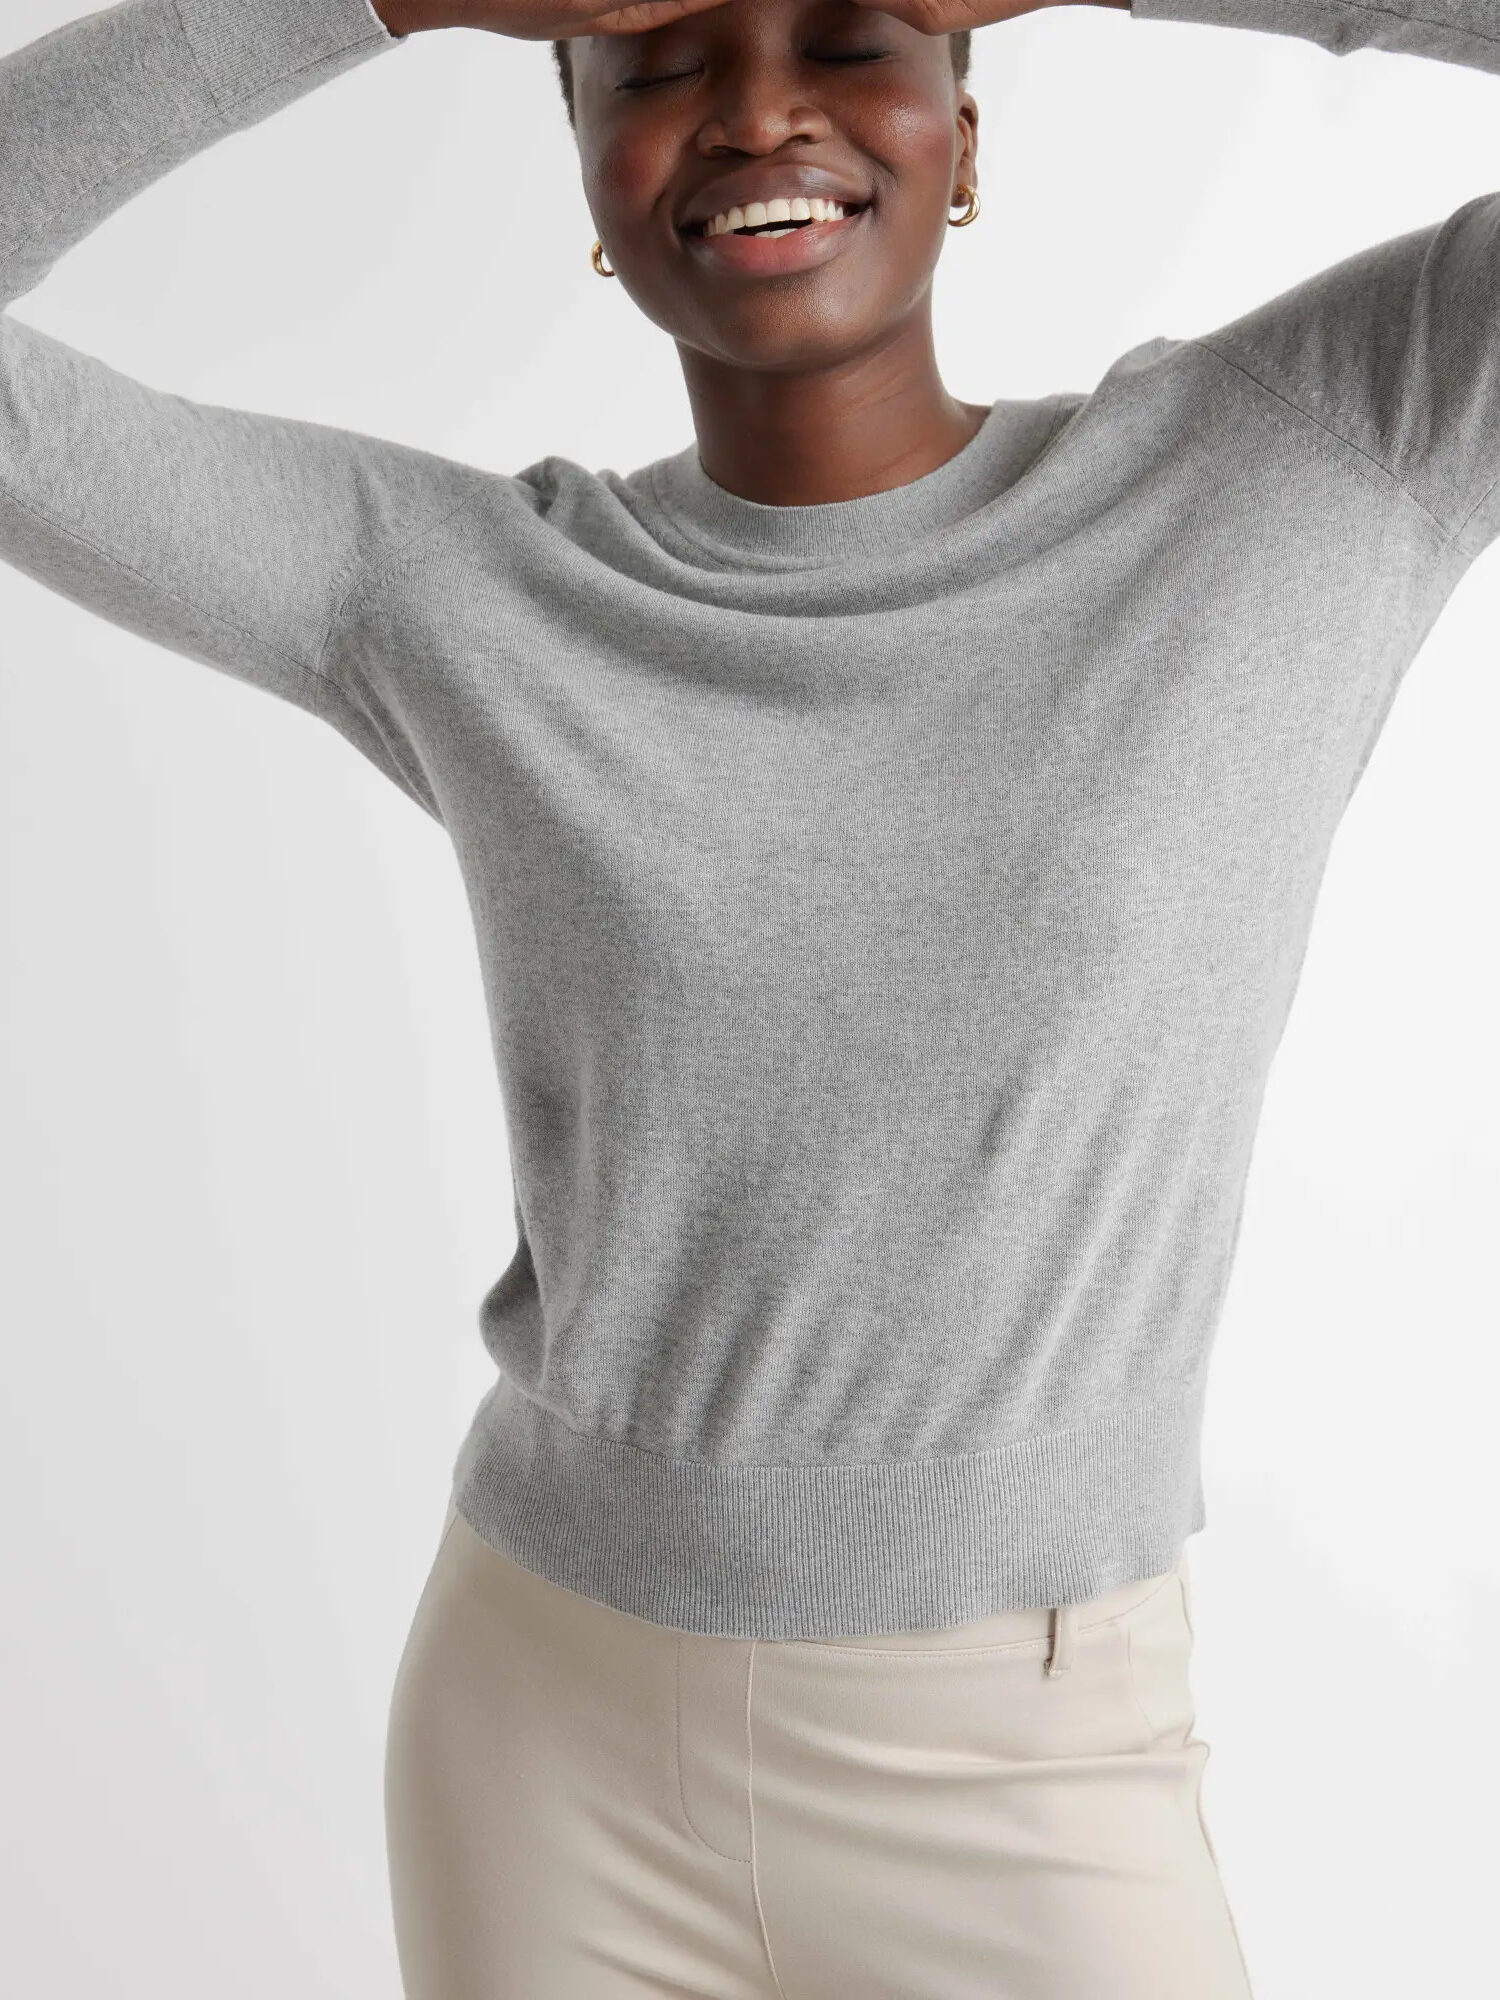 A model wearing a grey Lightweight Cotton Cashmere Crew by Quince.